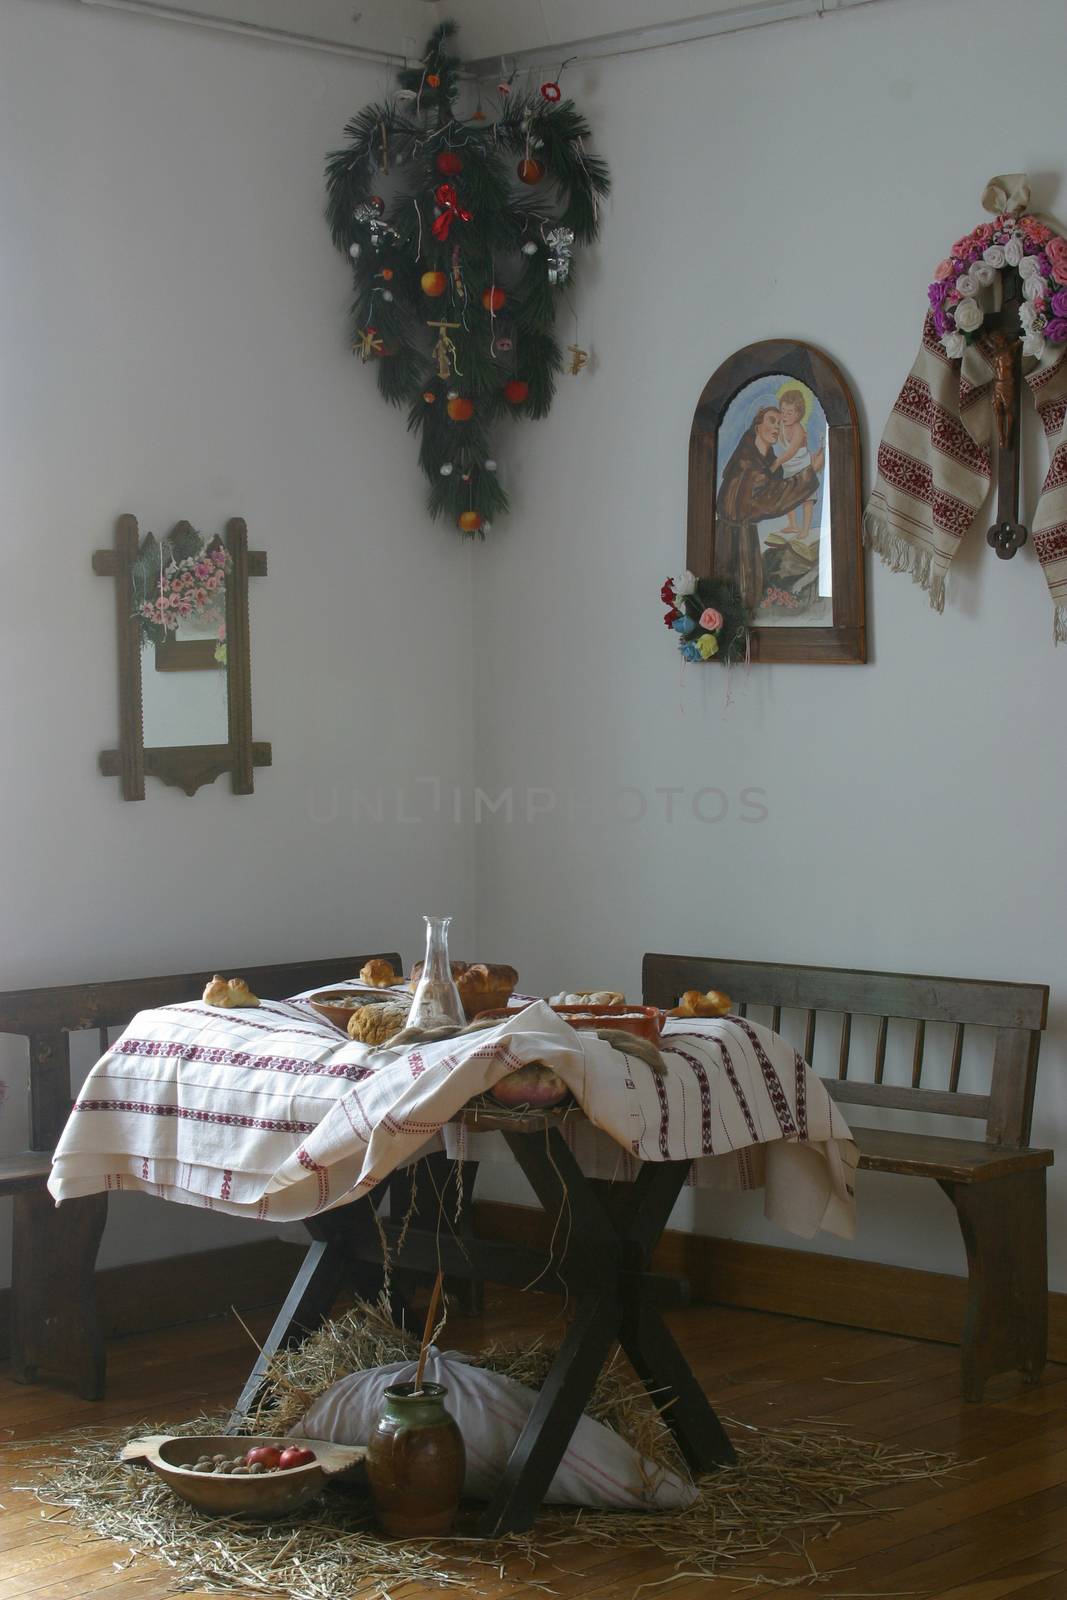 A nice dining table set for Christmas dinner in old countryhouse, central Europe -Croatia